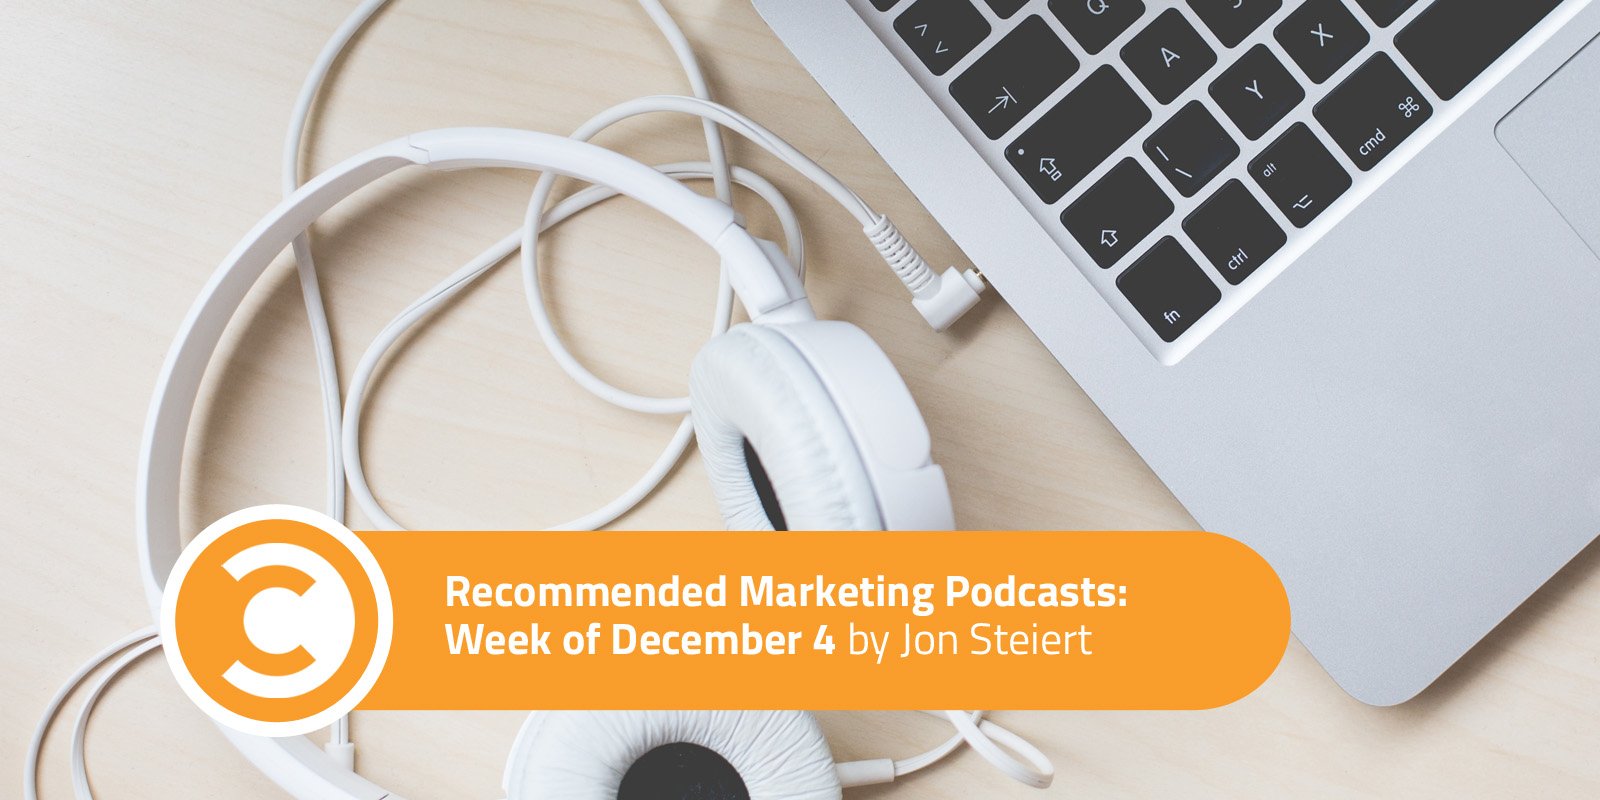 Recommended Marketing Podcasts Week of December 4